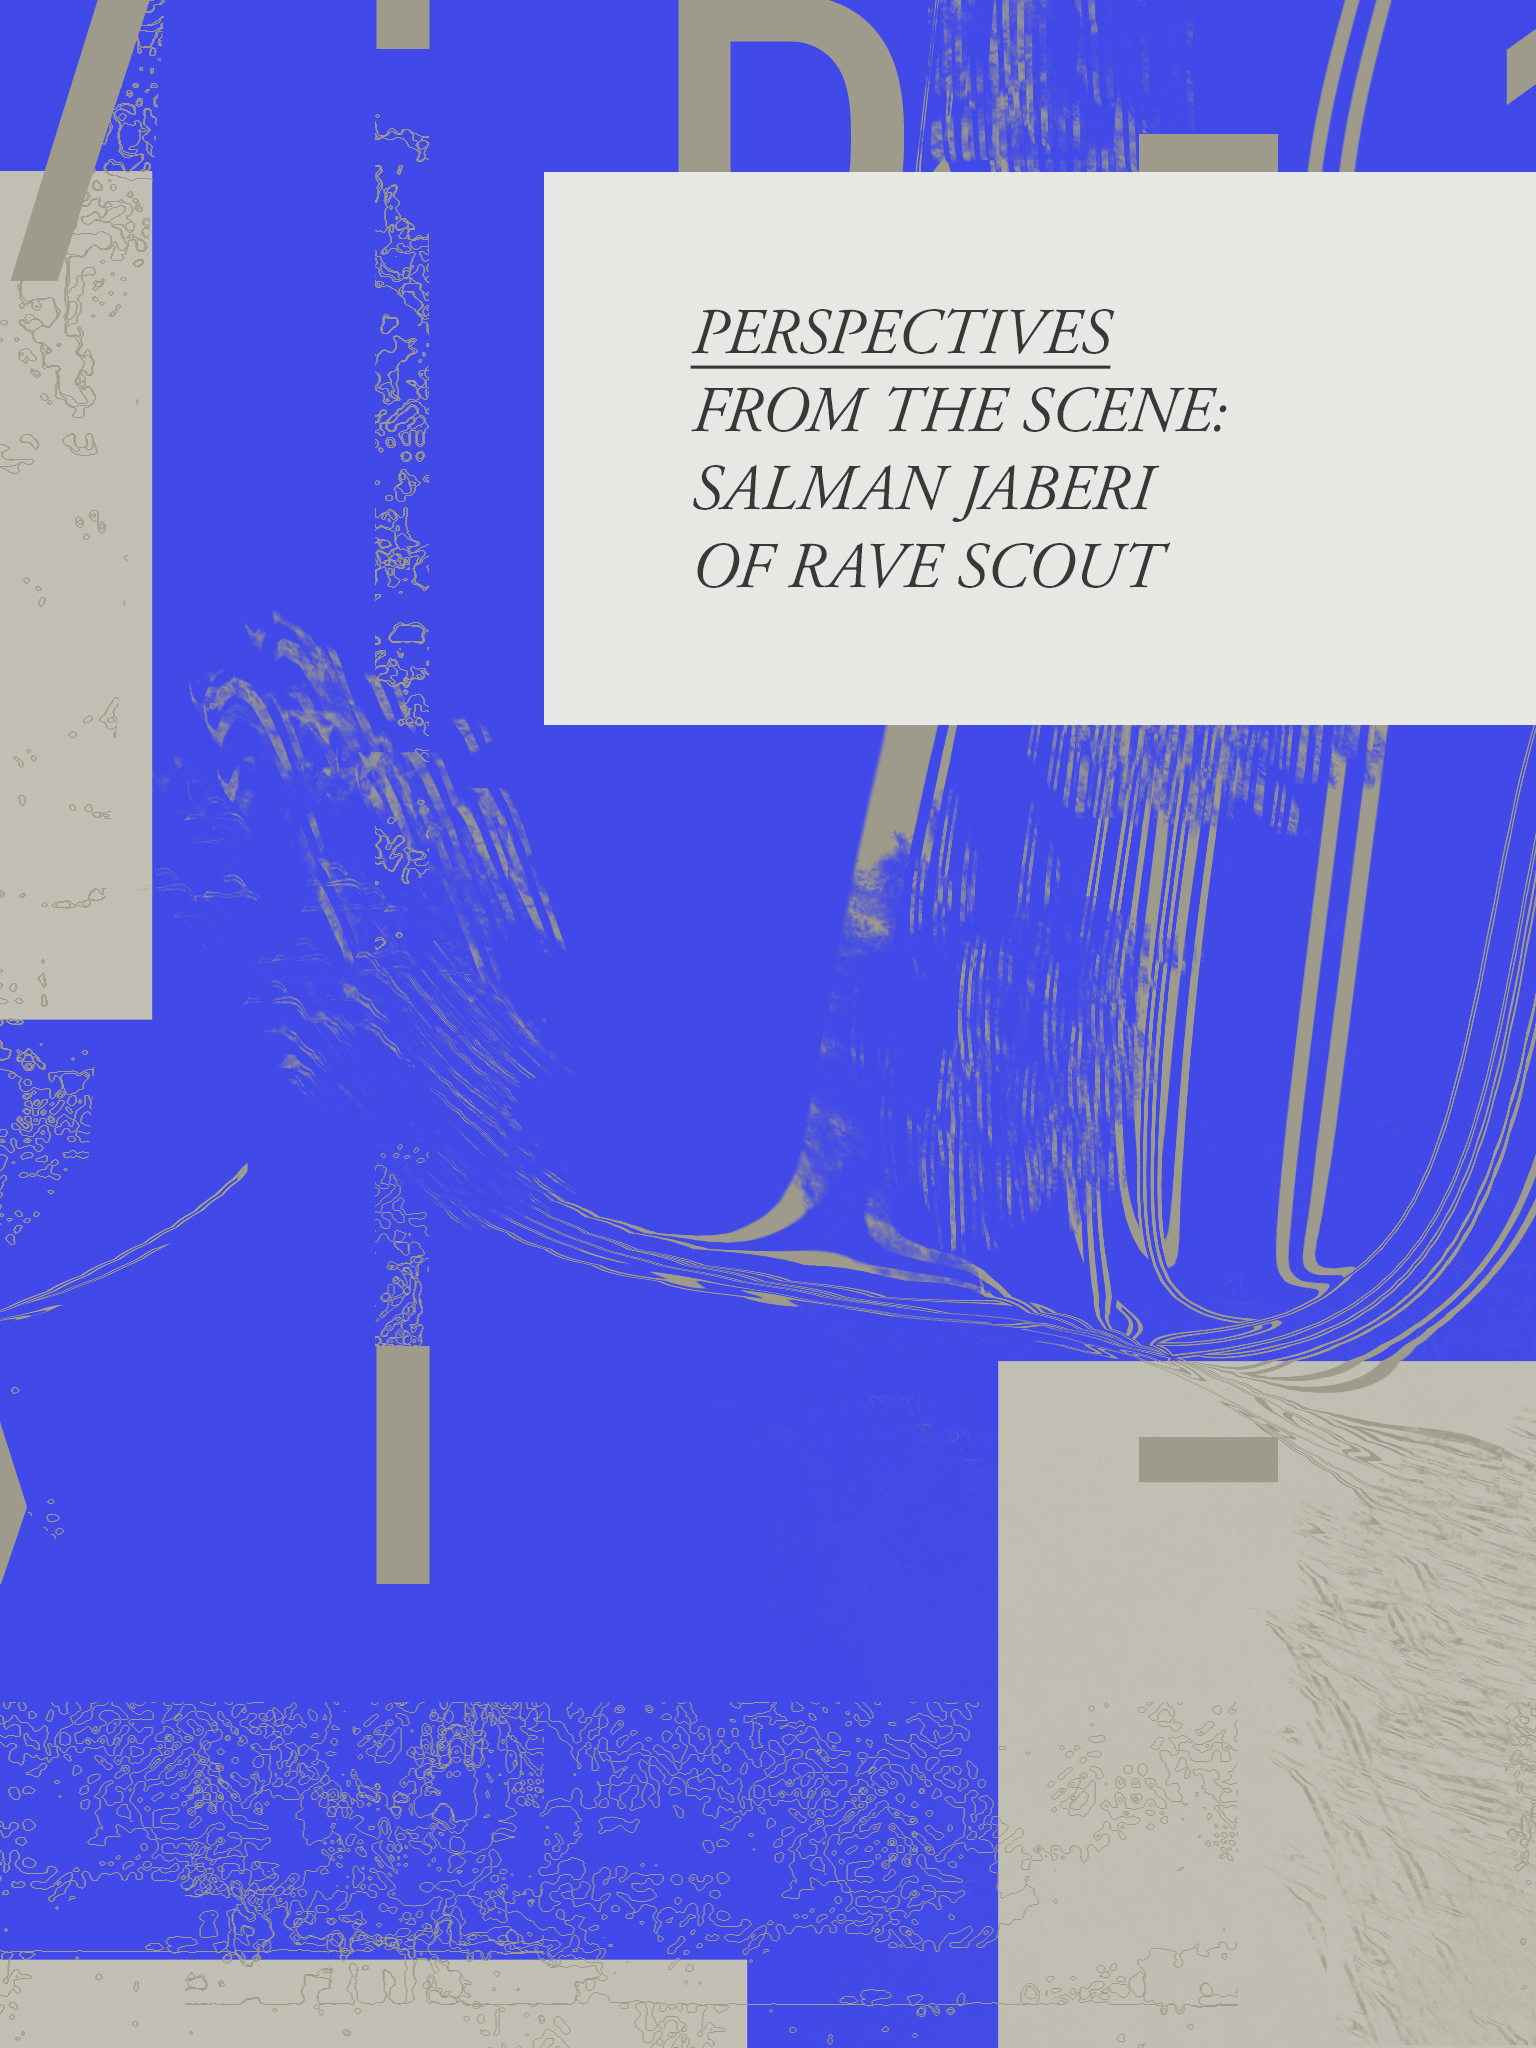 Perspectives From The Scene: Salman Jaberi of Rave Scout